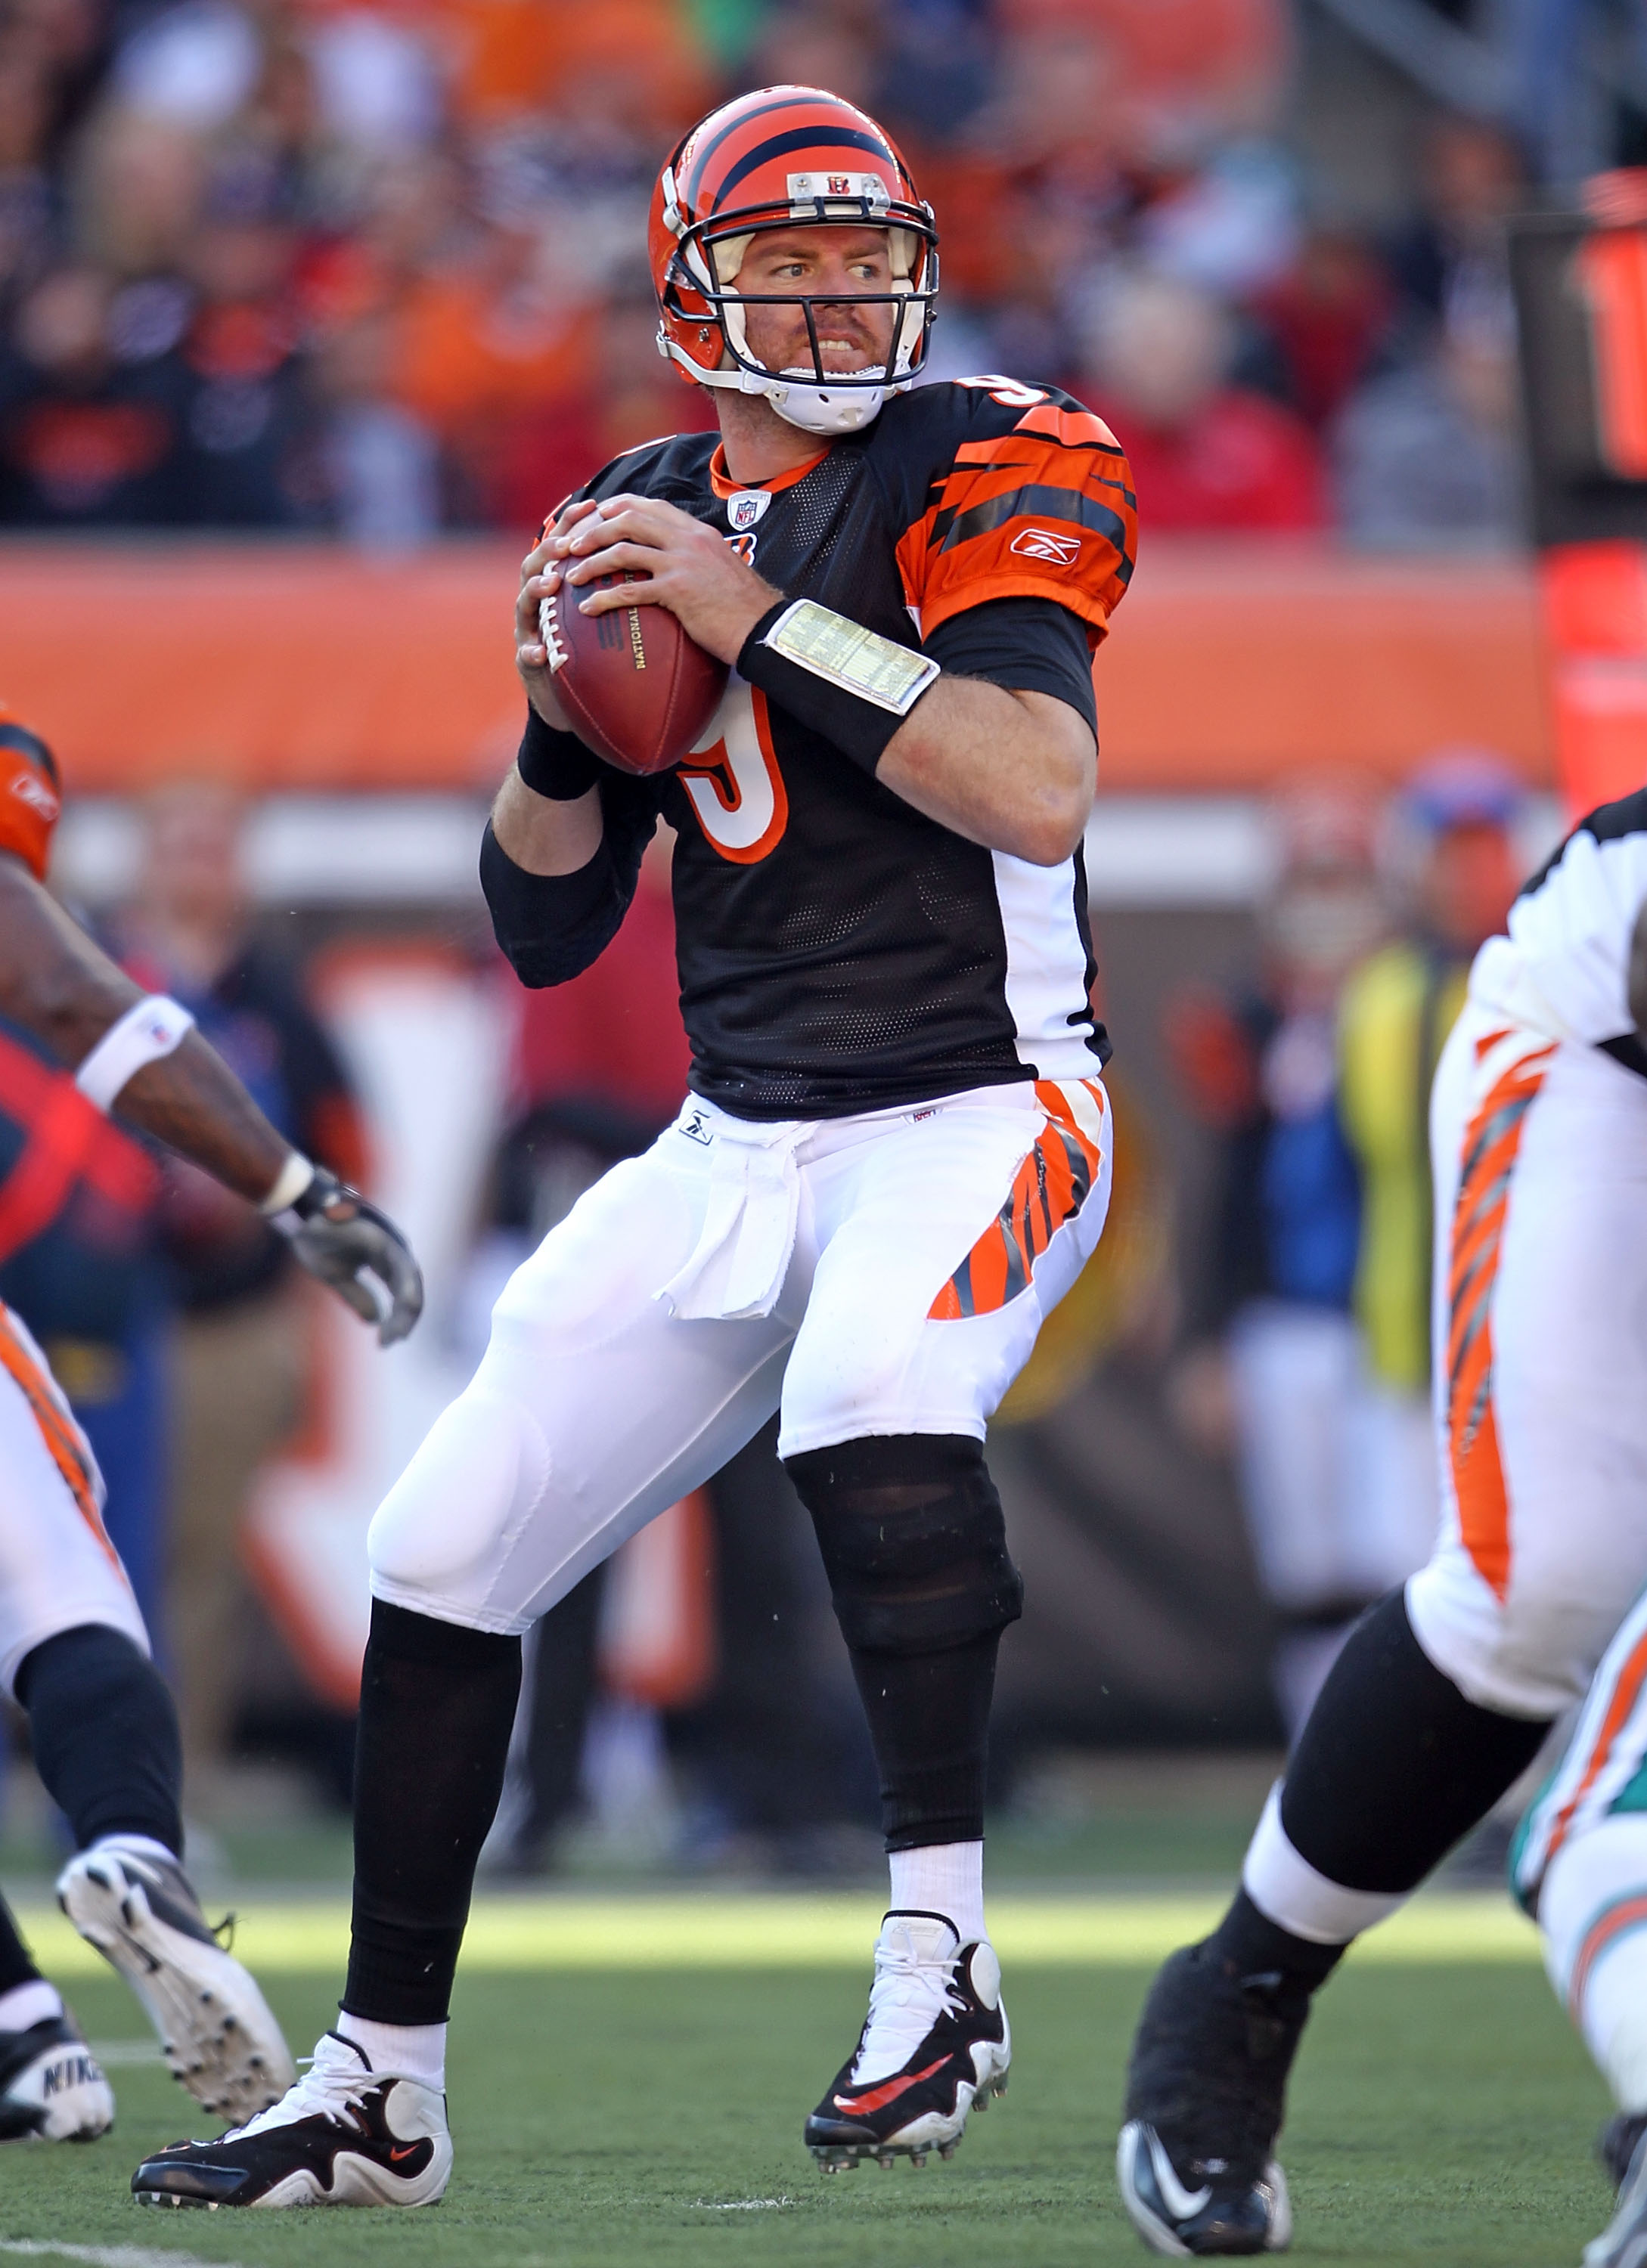 CINCINNATI - OCTOBER 31:  Carson Palmer #9 of  the Cincinnati Bengals throws a pass during the NFL game against the Miami Dolphins at Paul Brown Stadium on October 31, 2010 in Cincinnati, Ohio.  (Photo by Andy Lyons/Getty Images)